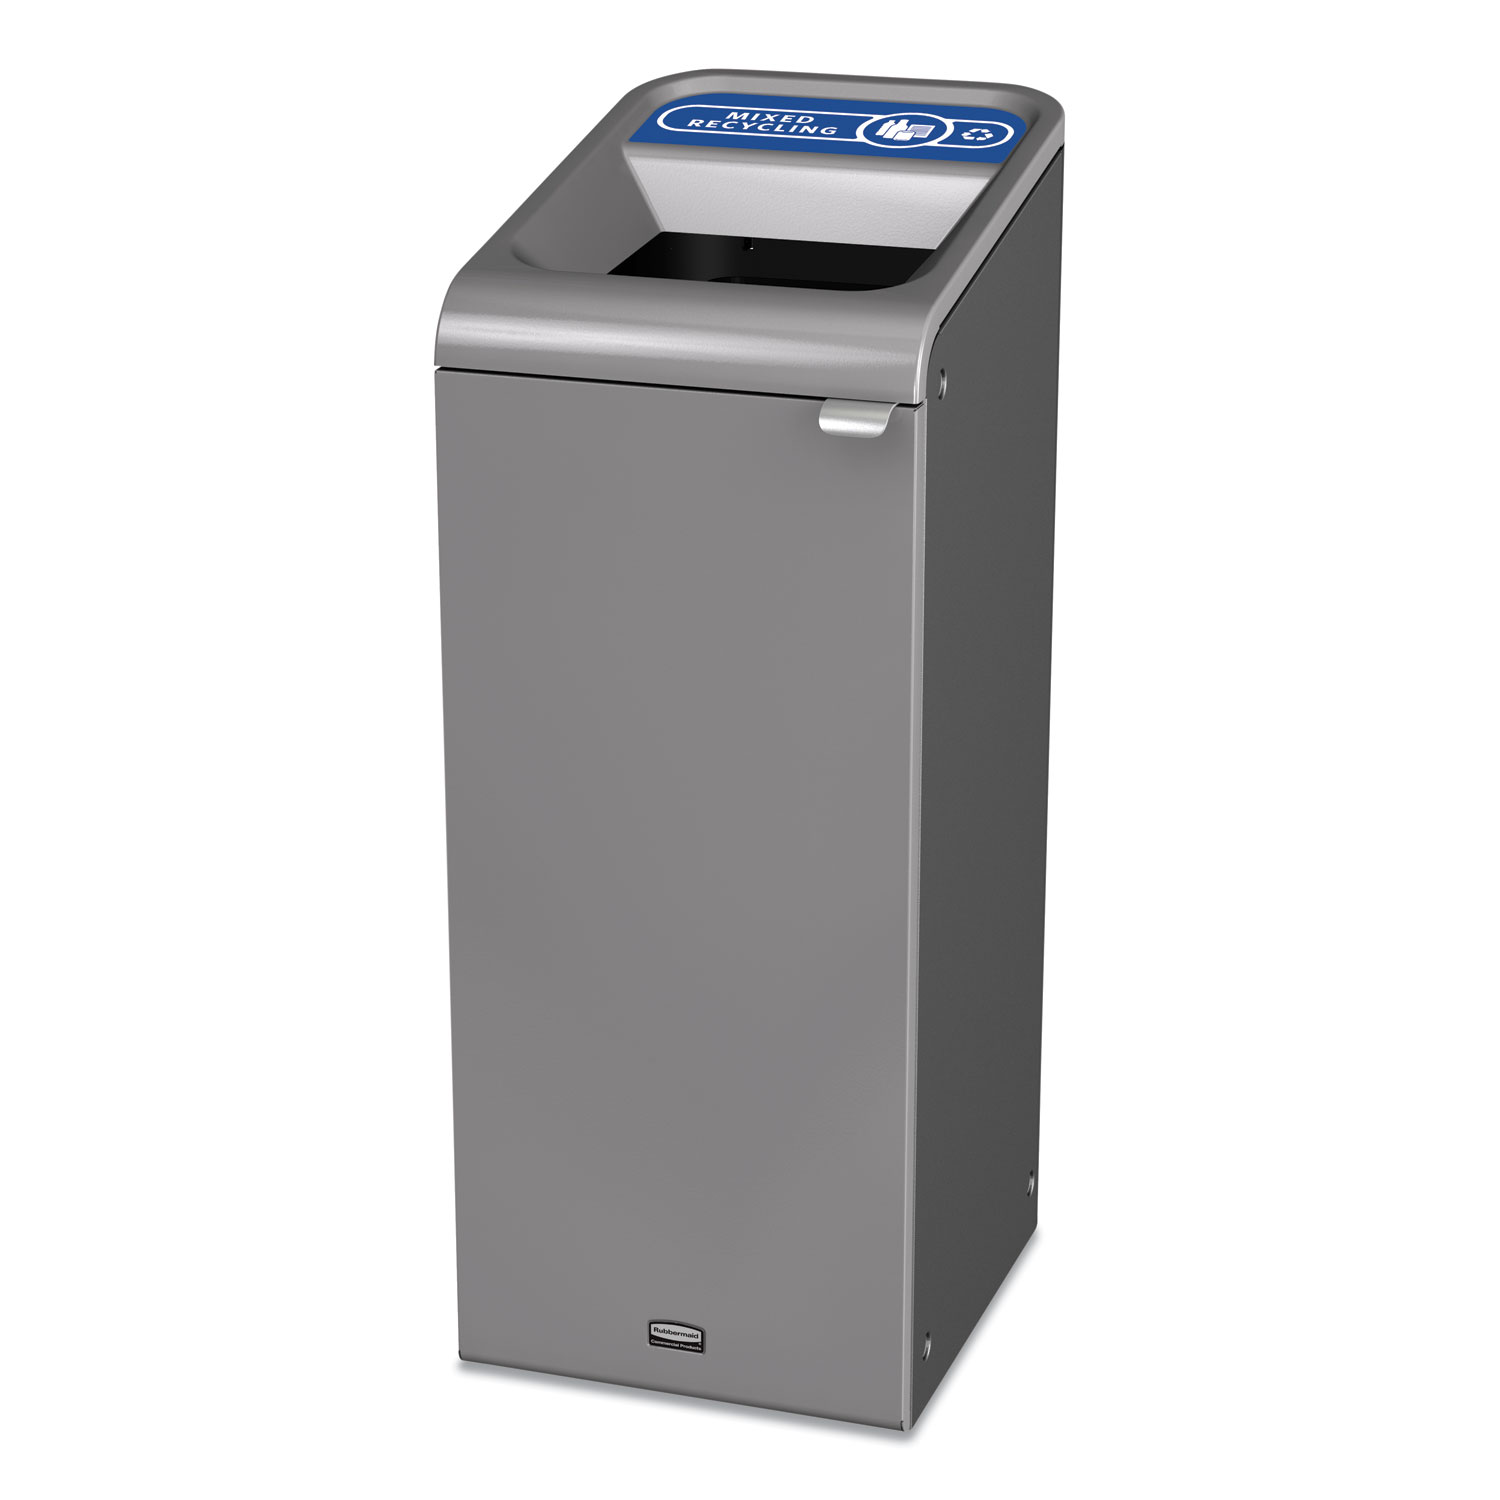  Rubbermaid Commercial 1961615 Configure Indoor Recycling Waste Receptacle, 15 gal, Gray, Mixed Recycling (RCP1961615) 